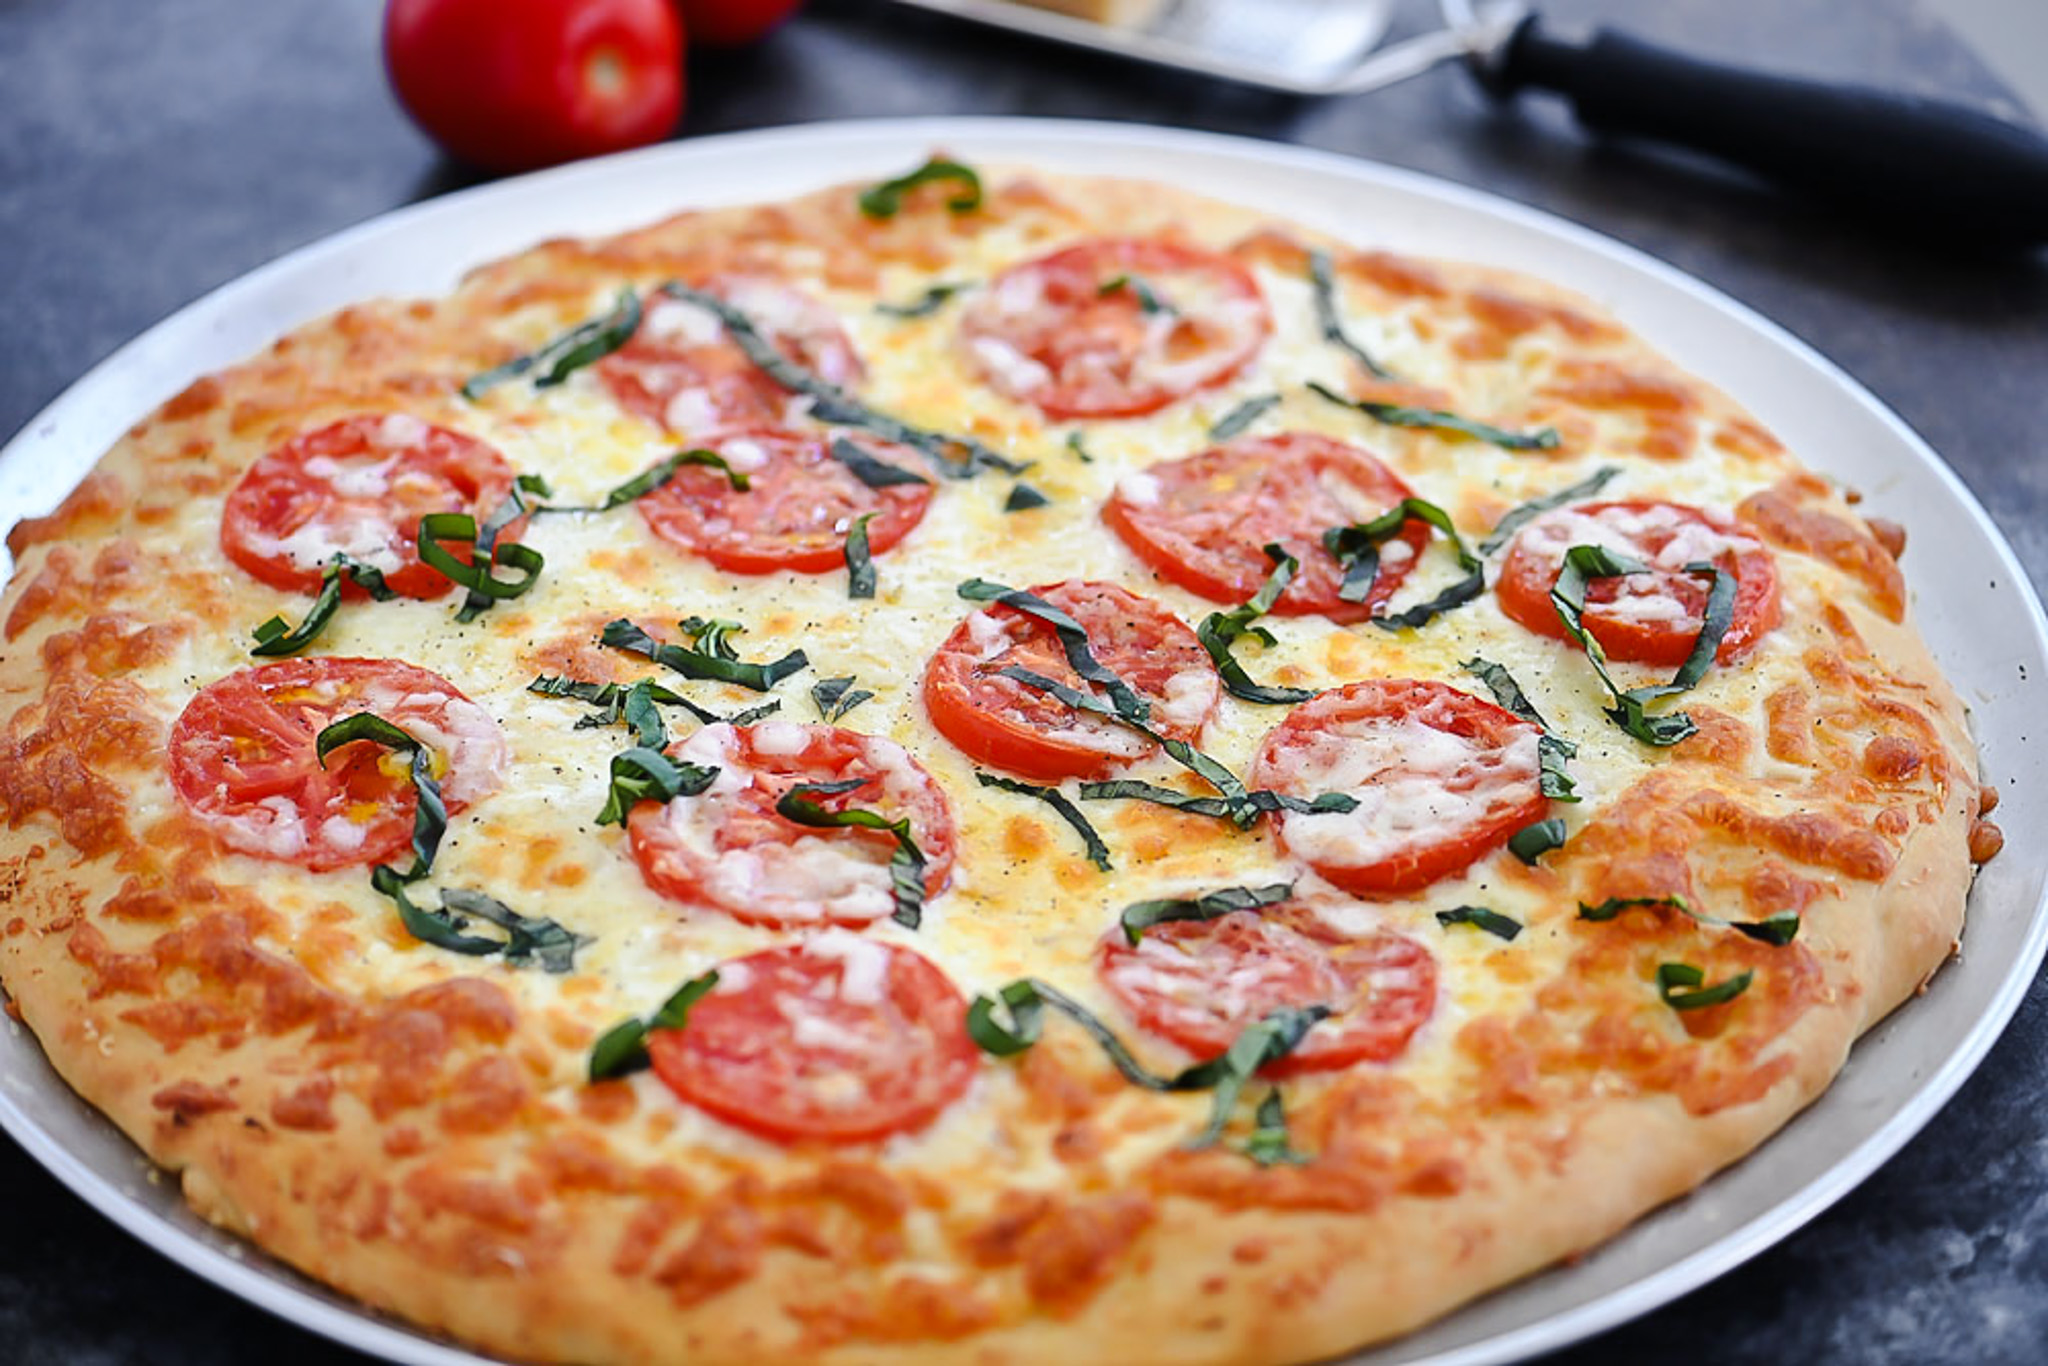 Margherita Pizza is topped with Mozzarella and Parmesan cheese, sliced tomatoes and fresh basil over pizza crust. Life-in-the-Lofthouse.com